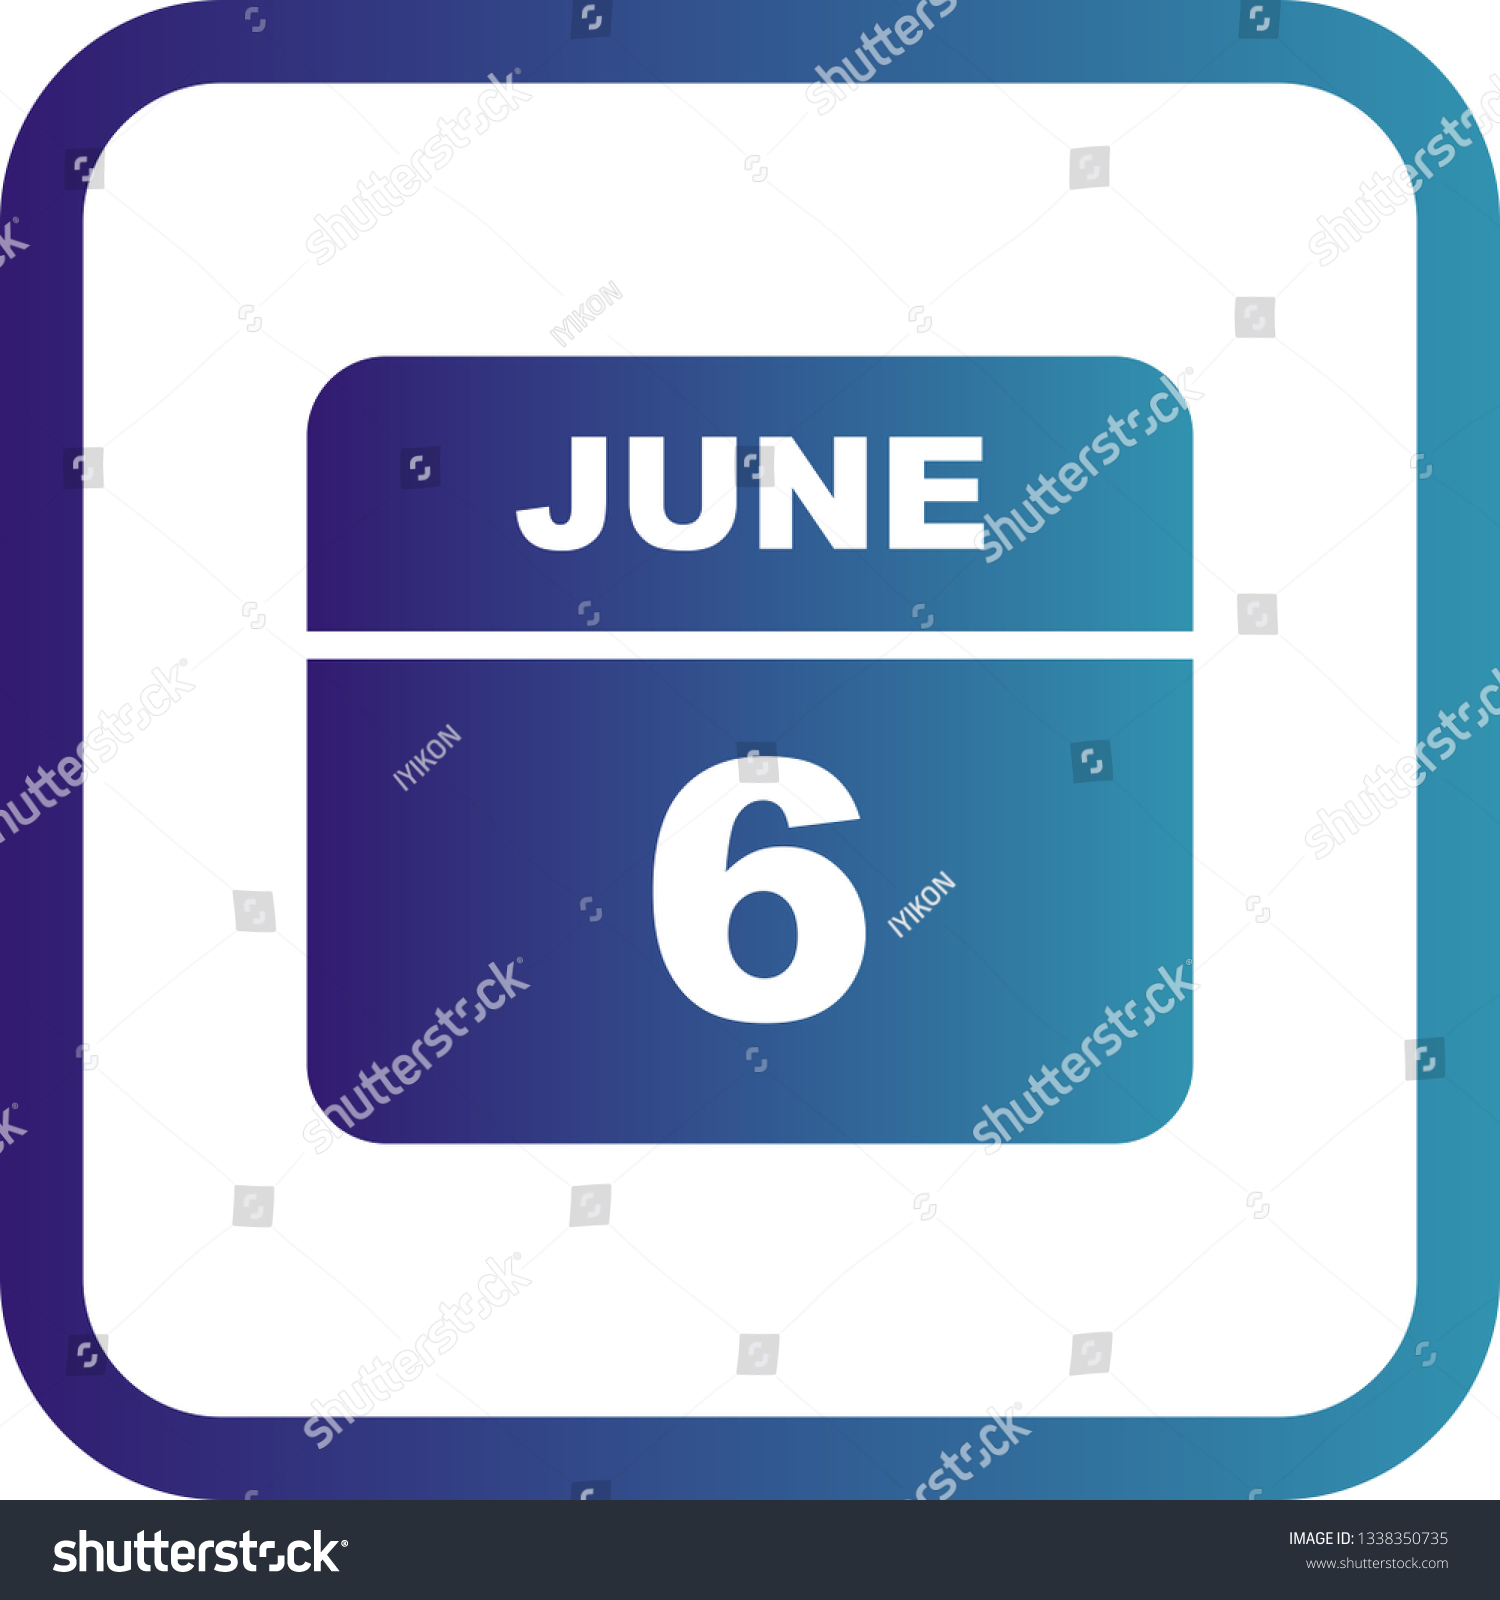 June 6th Date on a Single Day Calendar Royalty Free Stock Vector